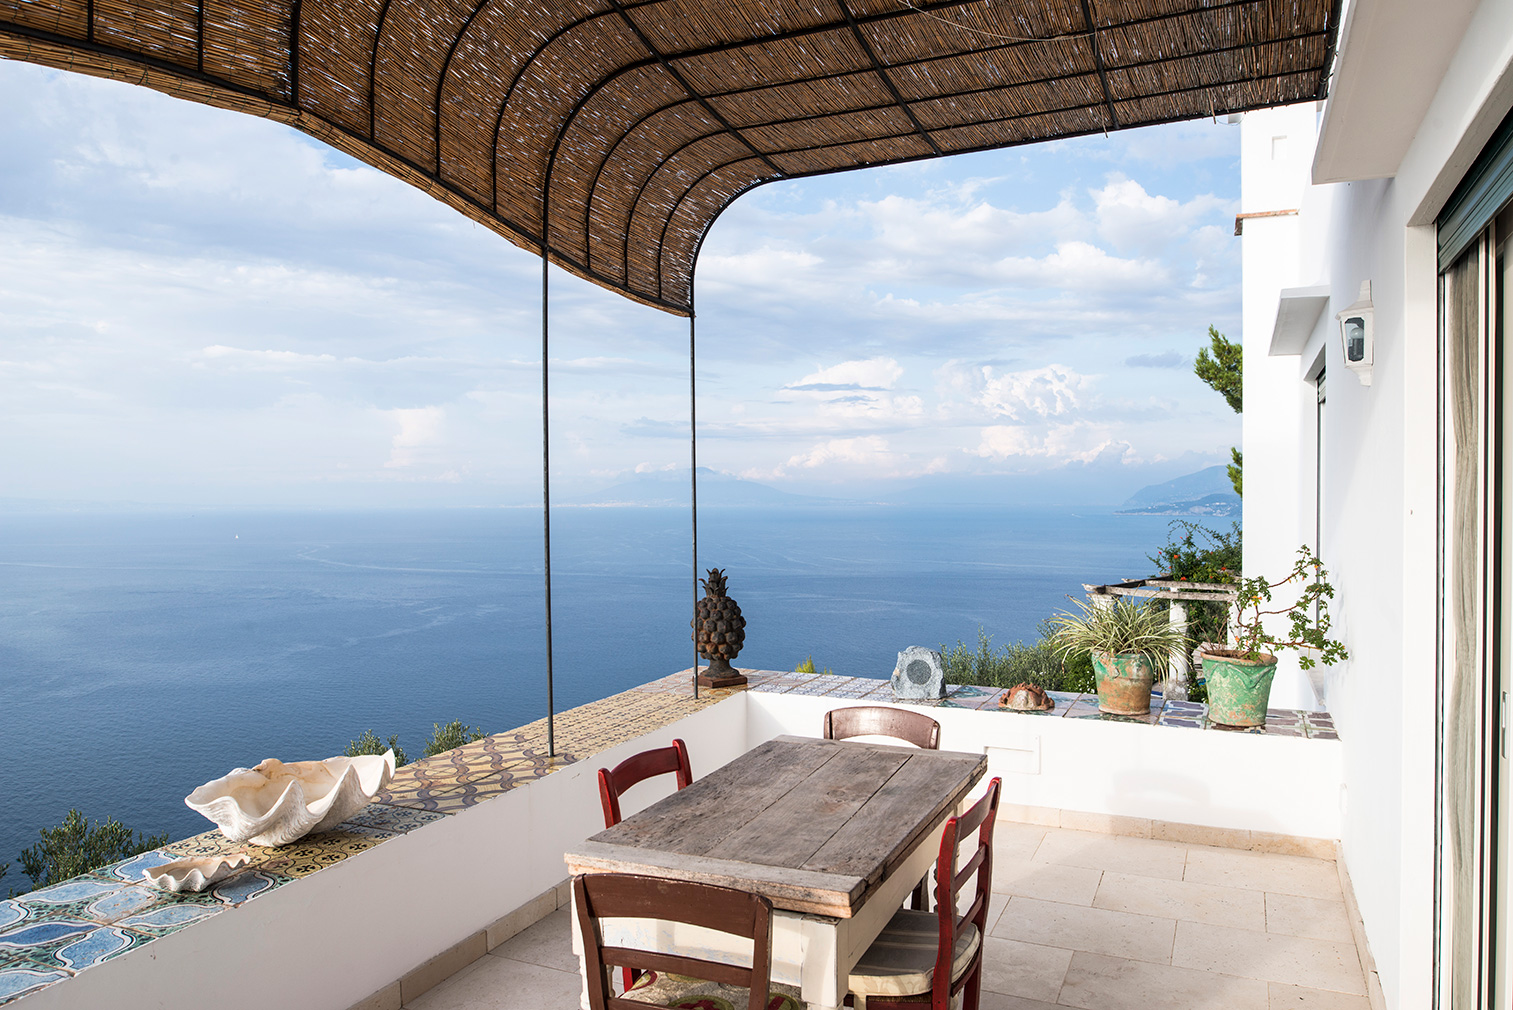 A clifftop villa with sea views hits the market on the island of Capri